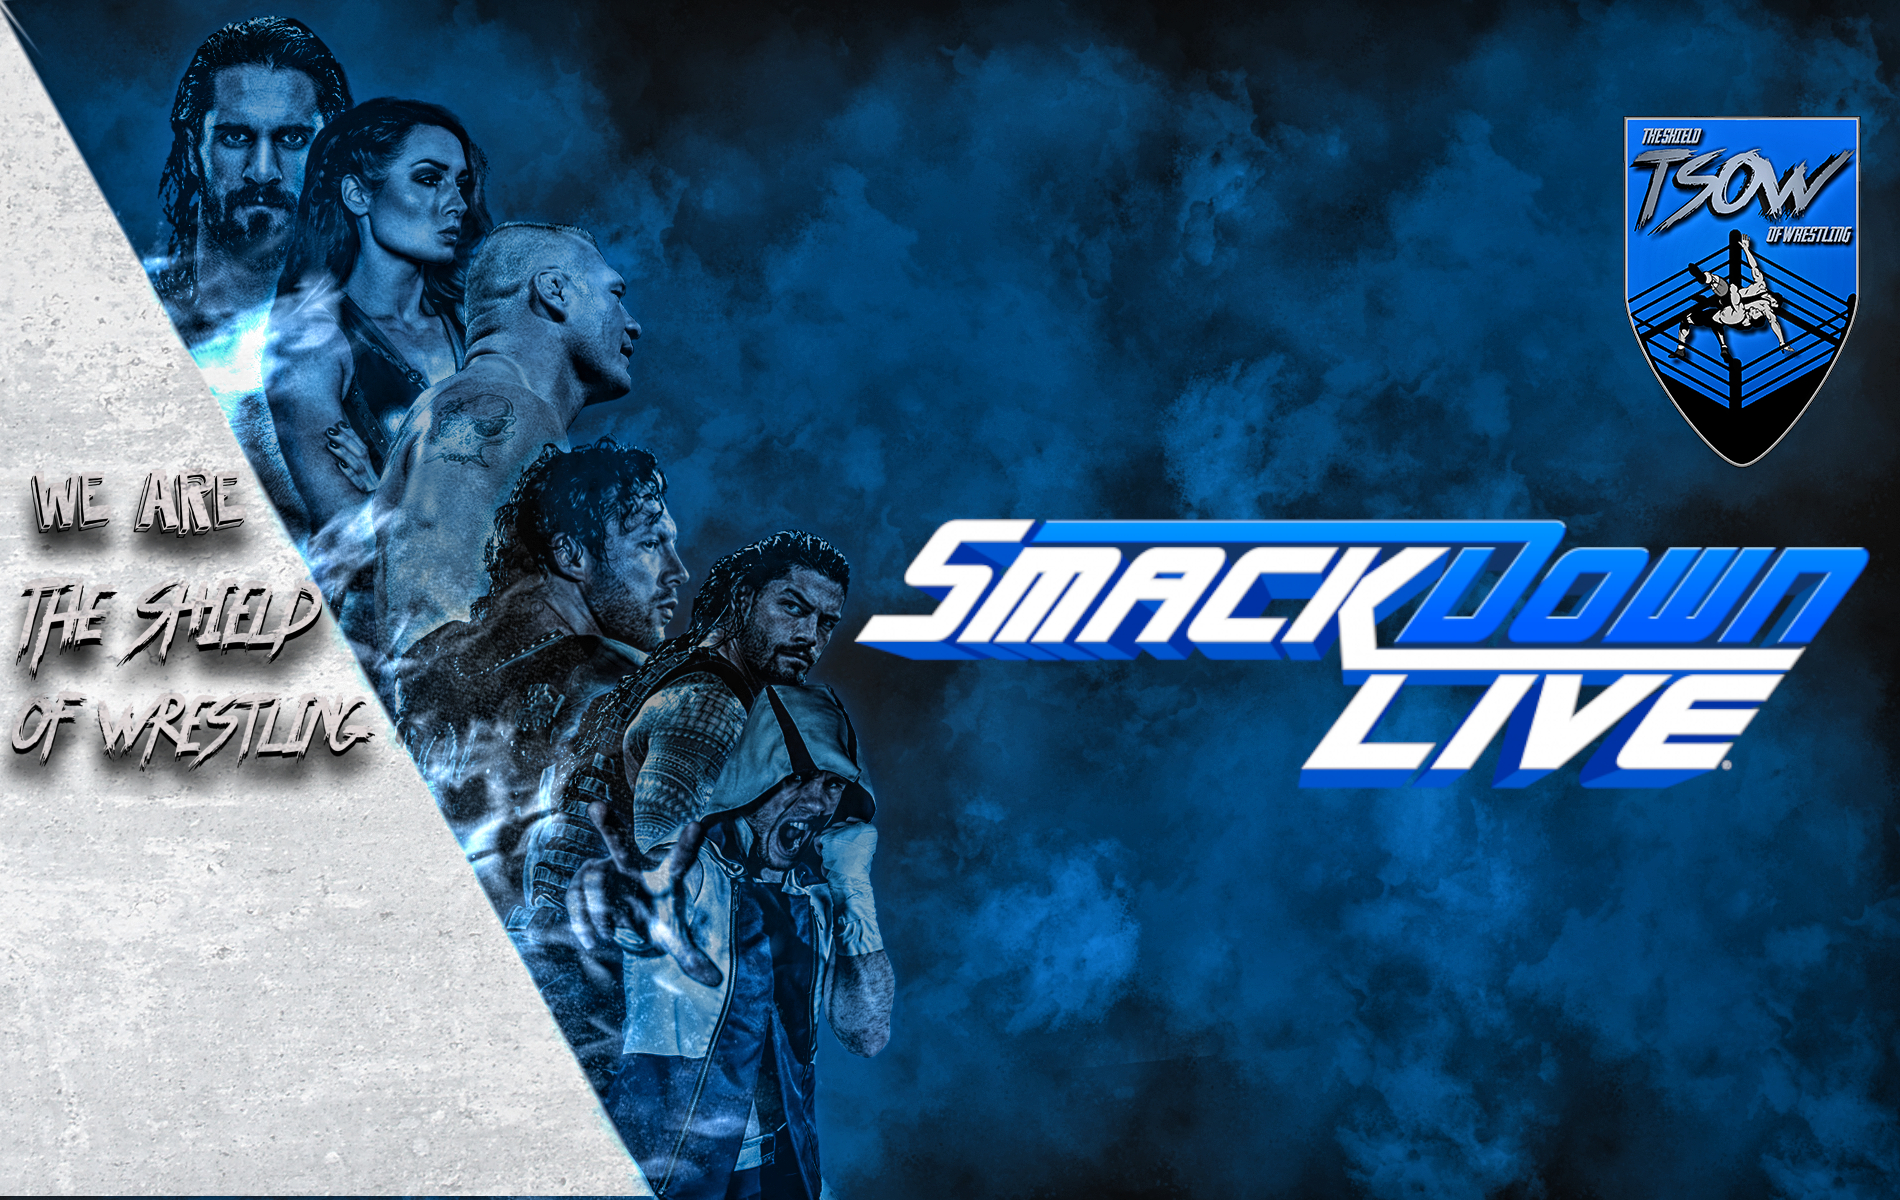 smackdown-preview-27-08-2019-the-shield-of-wrestling